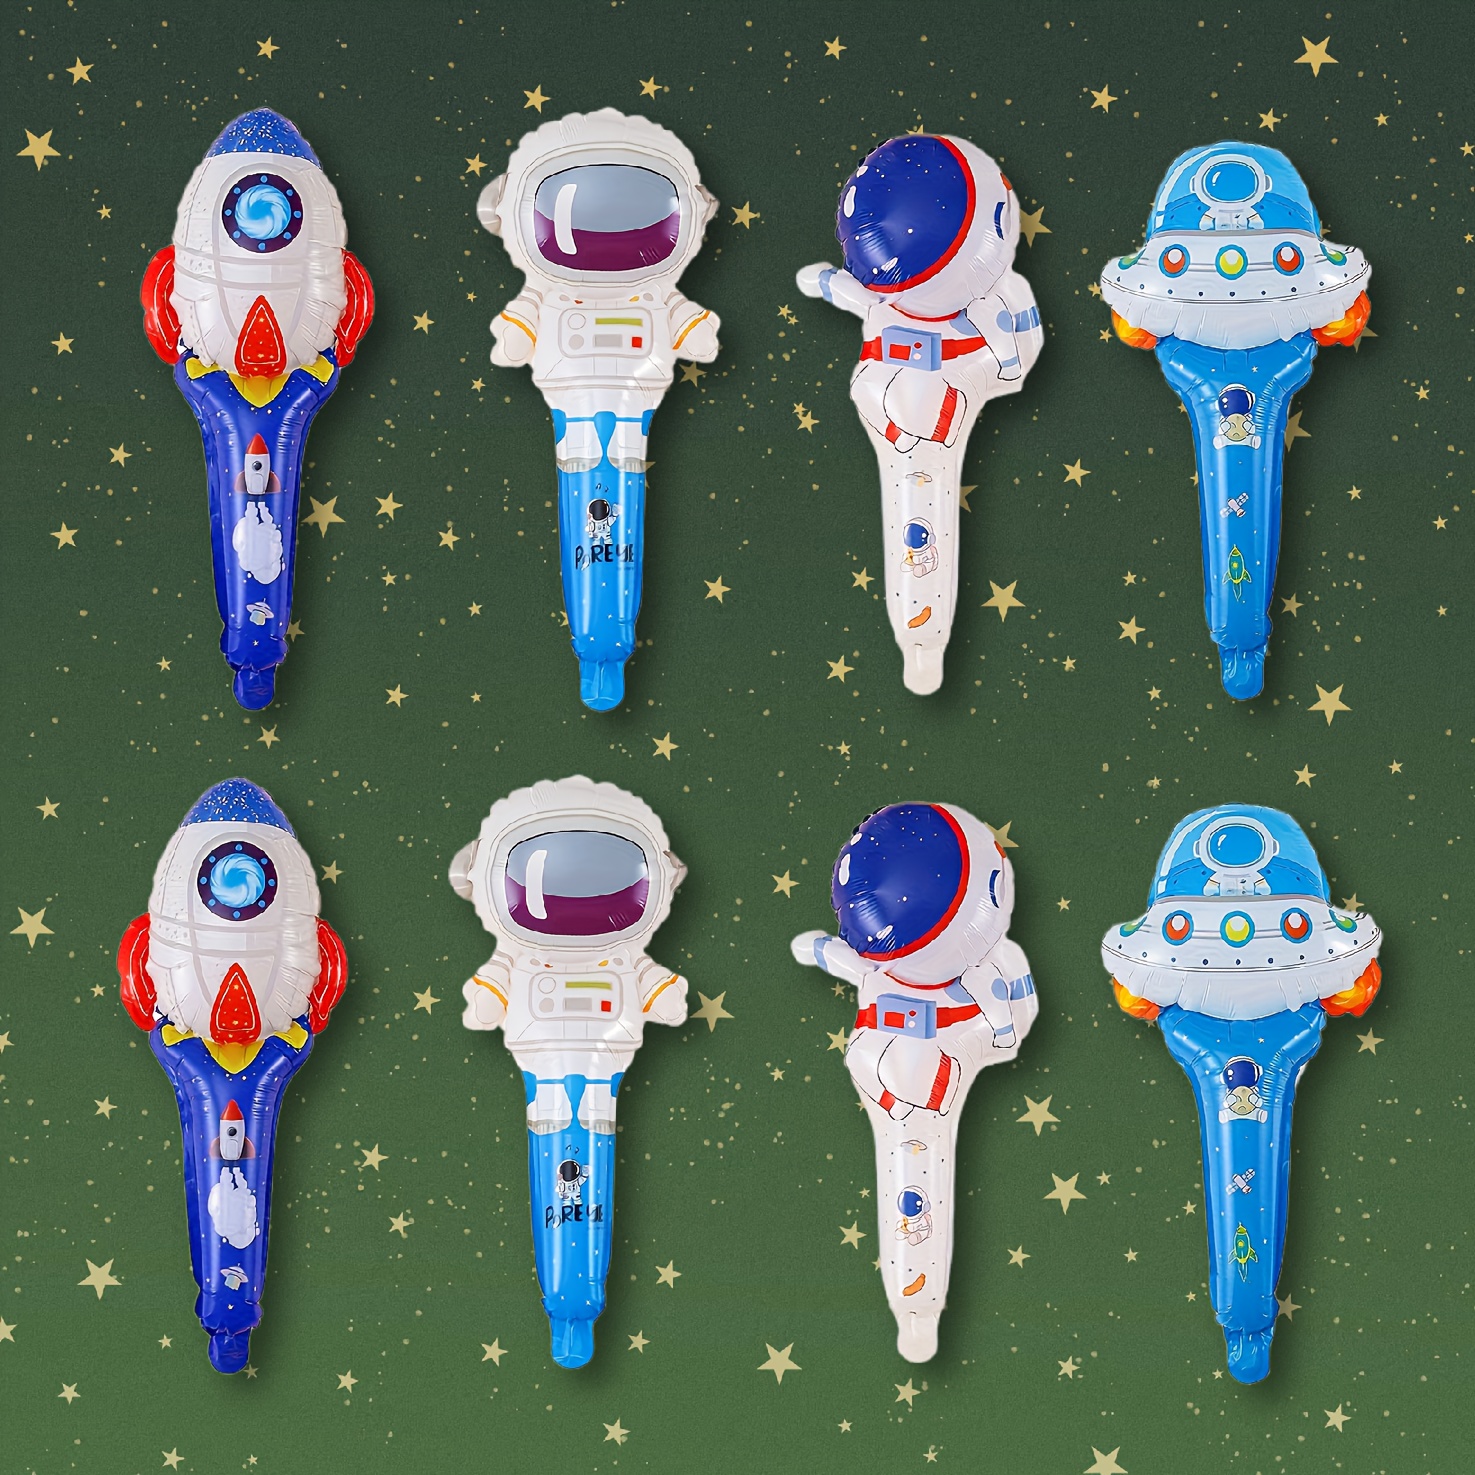 

8-piece Astronaut Foil Balloons With Handheld Sticks - Perfect For Space-themed Birthday Parties & Decorations, Ages 14+